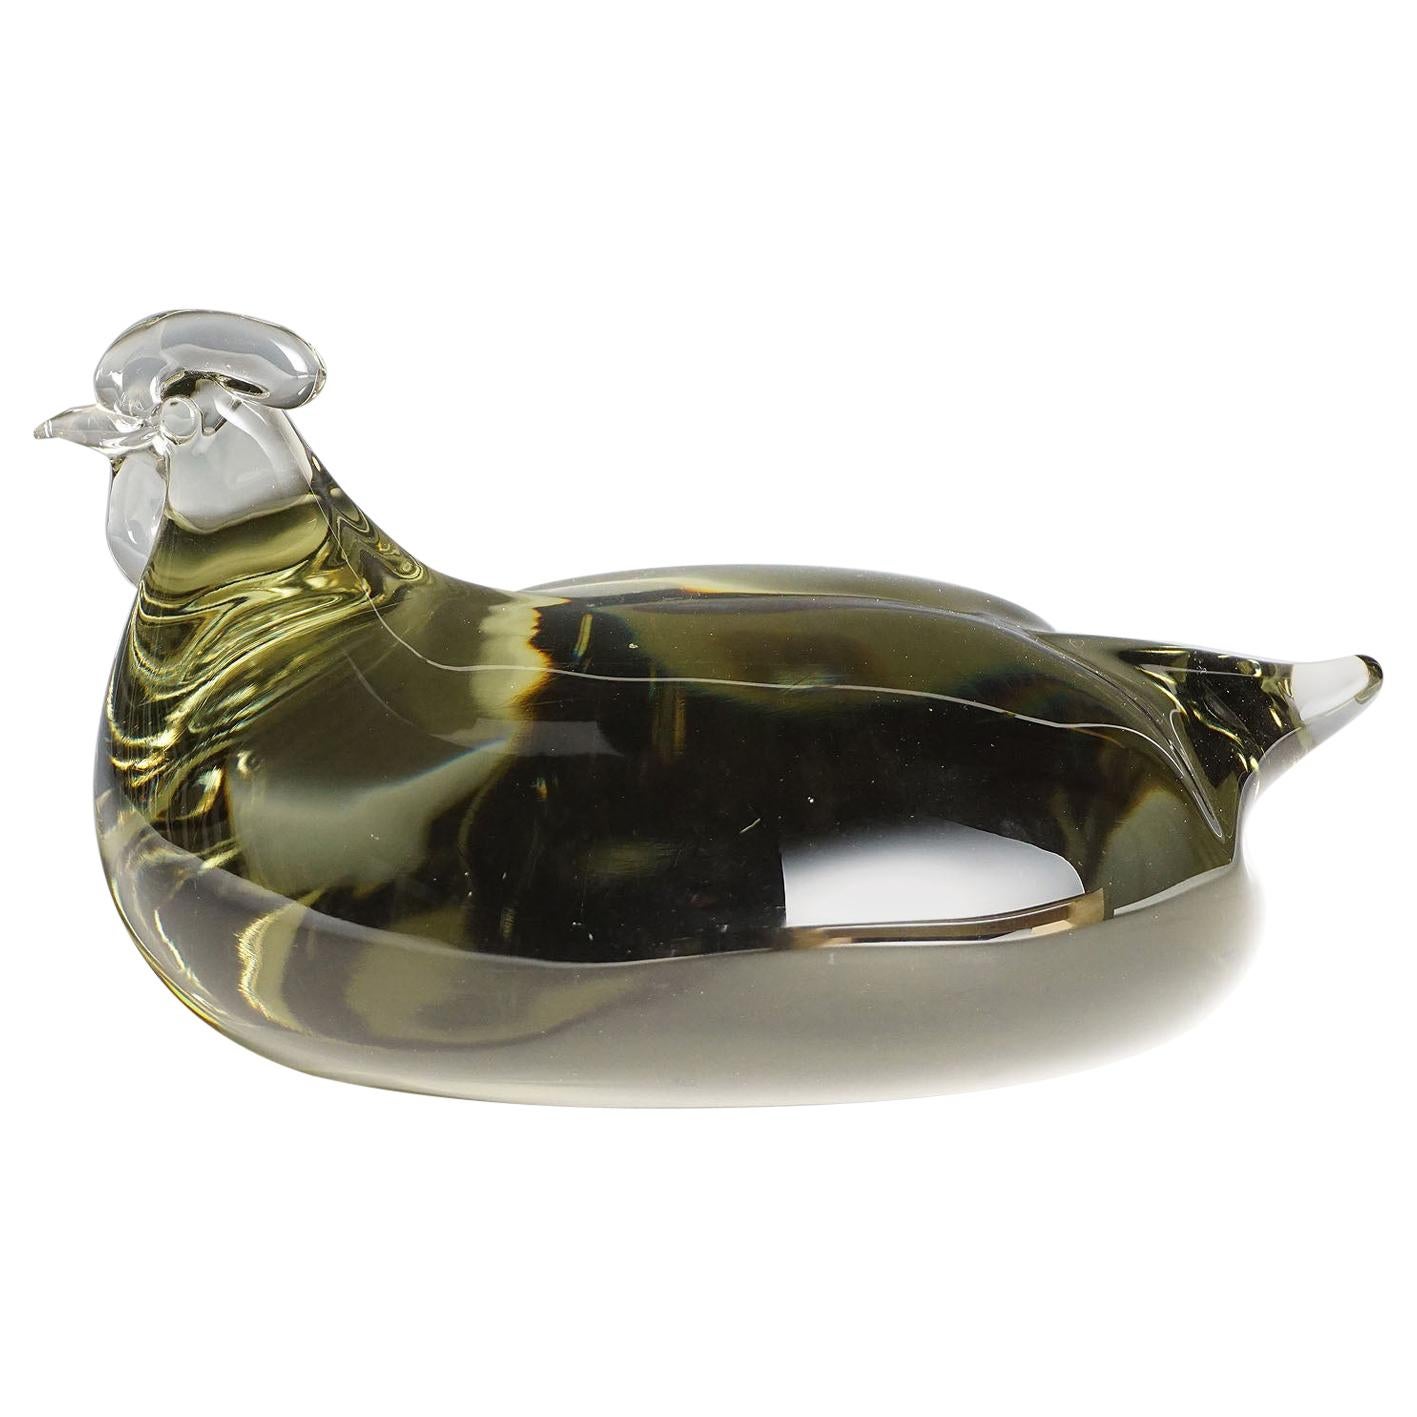 Art Glass Sculpture of a Hen by Livio Seguso for Gral, Germany, circa 1970s For Sale